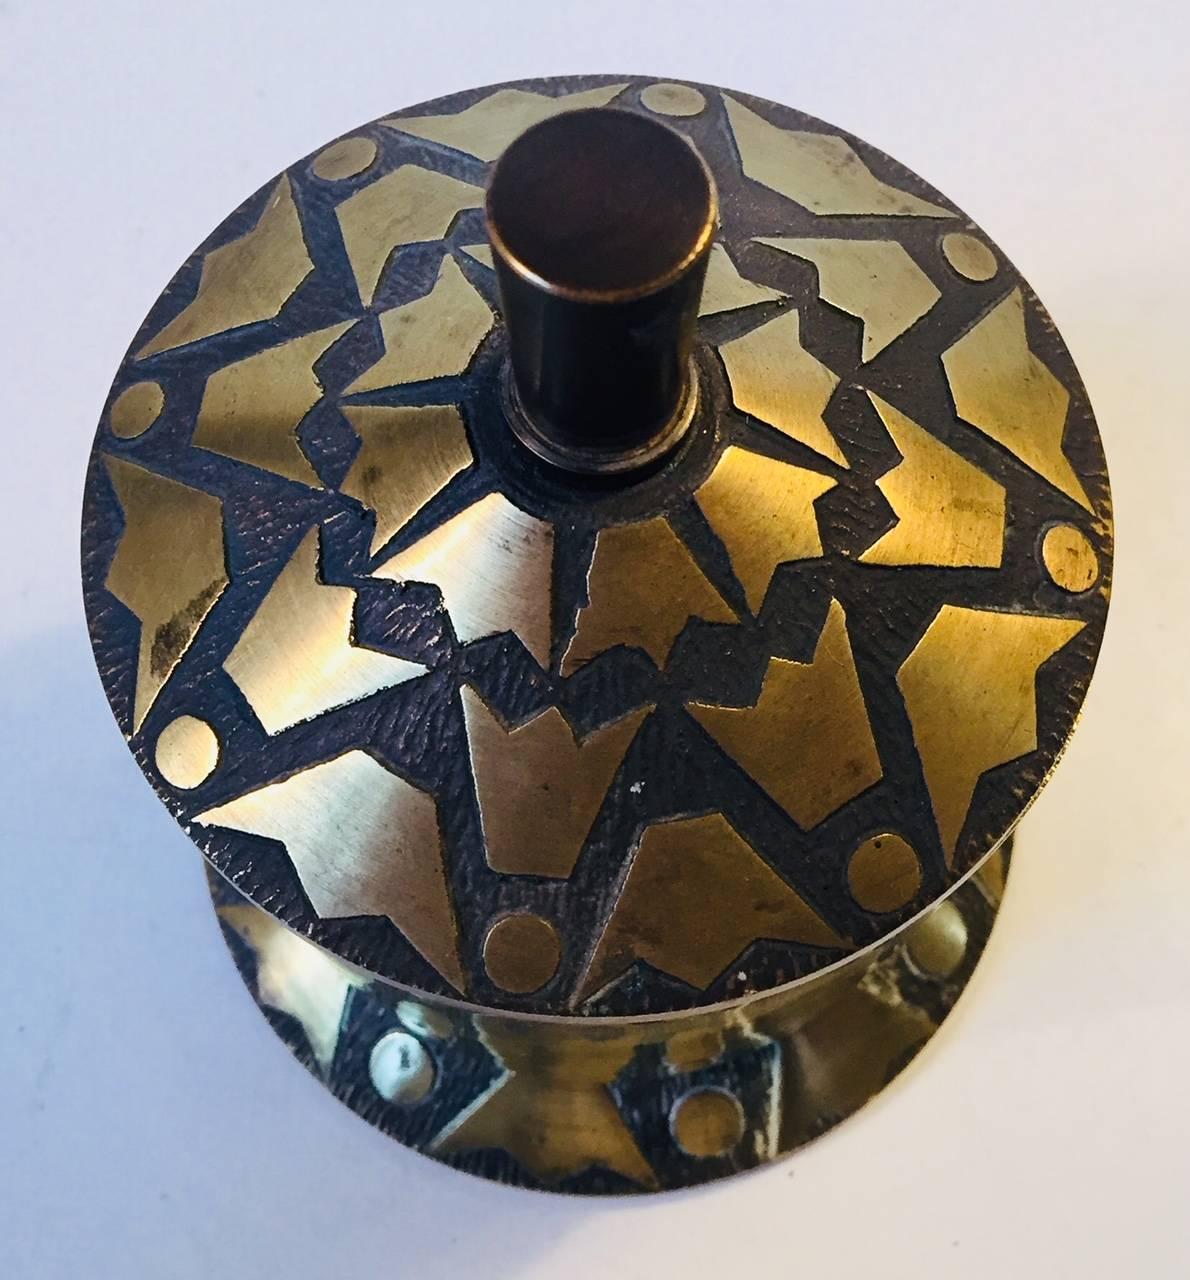 Lidded bronze jar, trinket or cigarette container decorated with crown motif's. Manufactured and designed by Nordisk Malm in Denmark during the 1930s in a style reminiscent of Tinos and Argentor. The piece has a shallow engraving to the side that